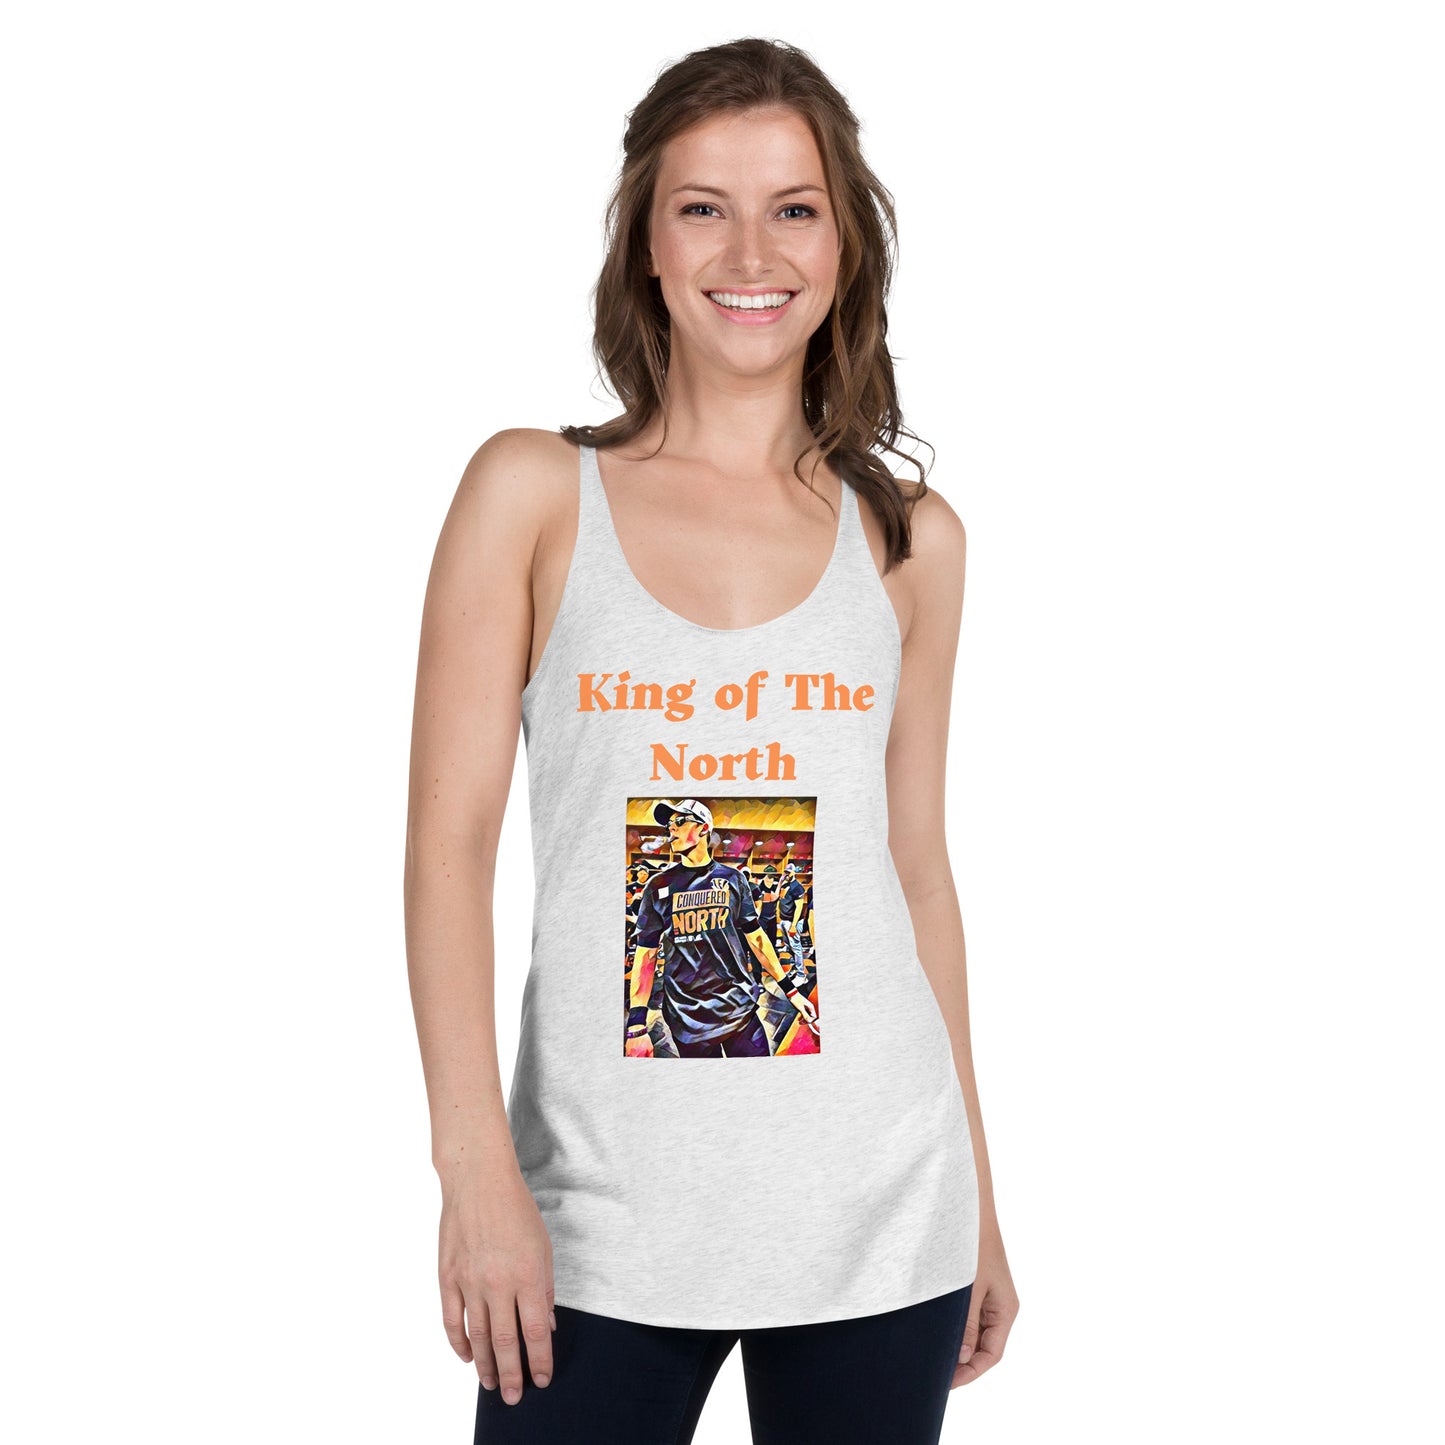 King of the North Women's Racerback Tank